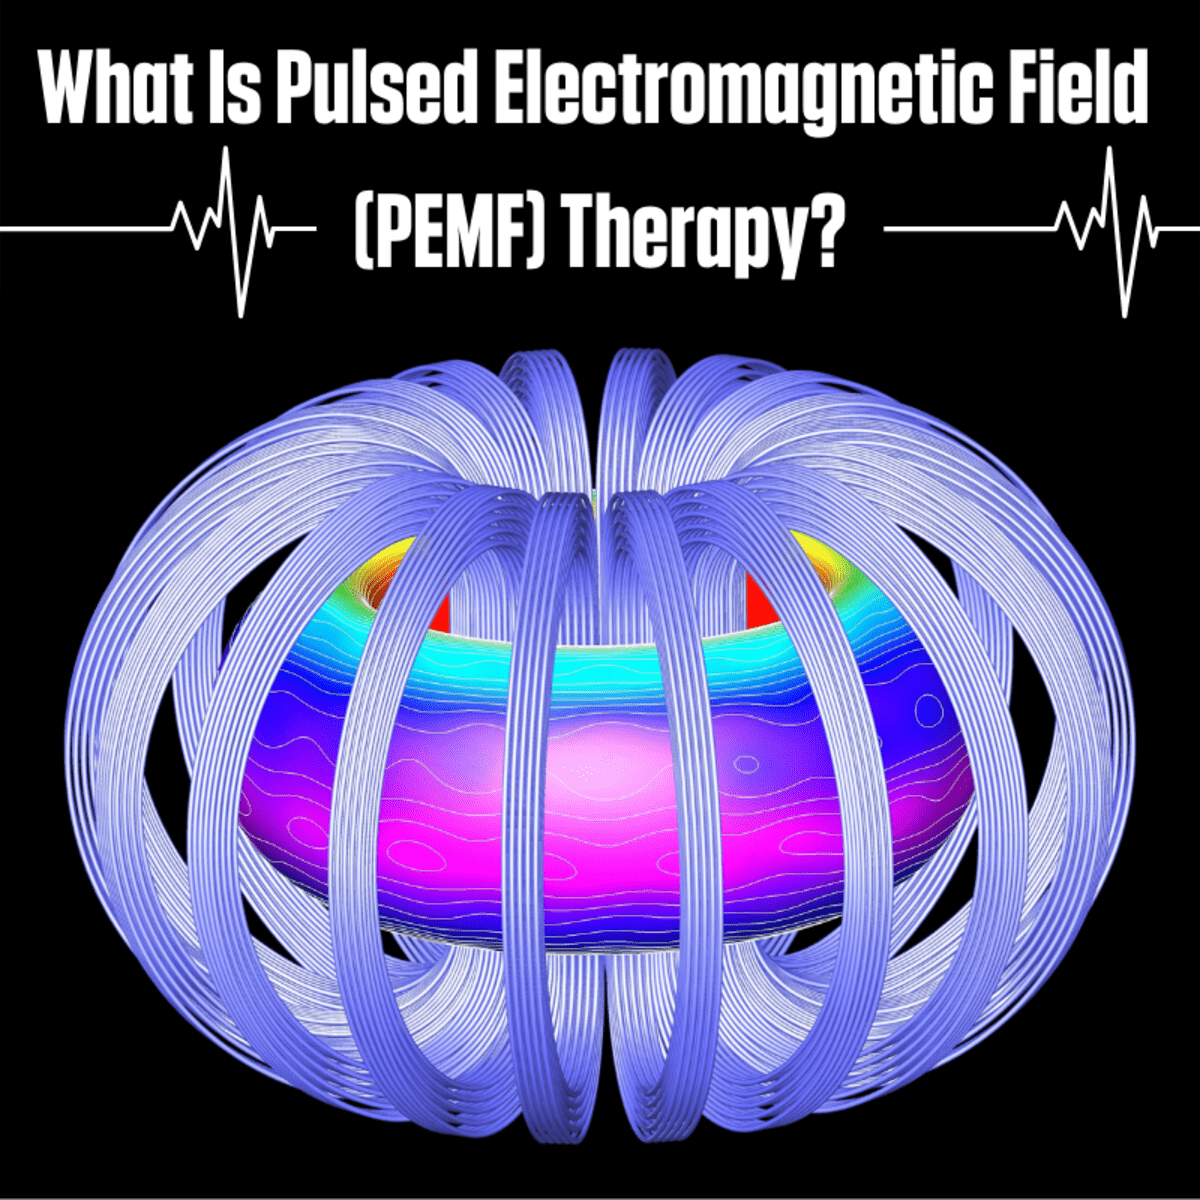 A pulsed electromagnetic field device. PEMF devices consist of a